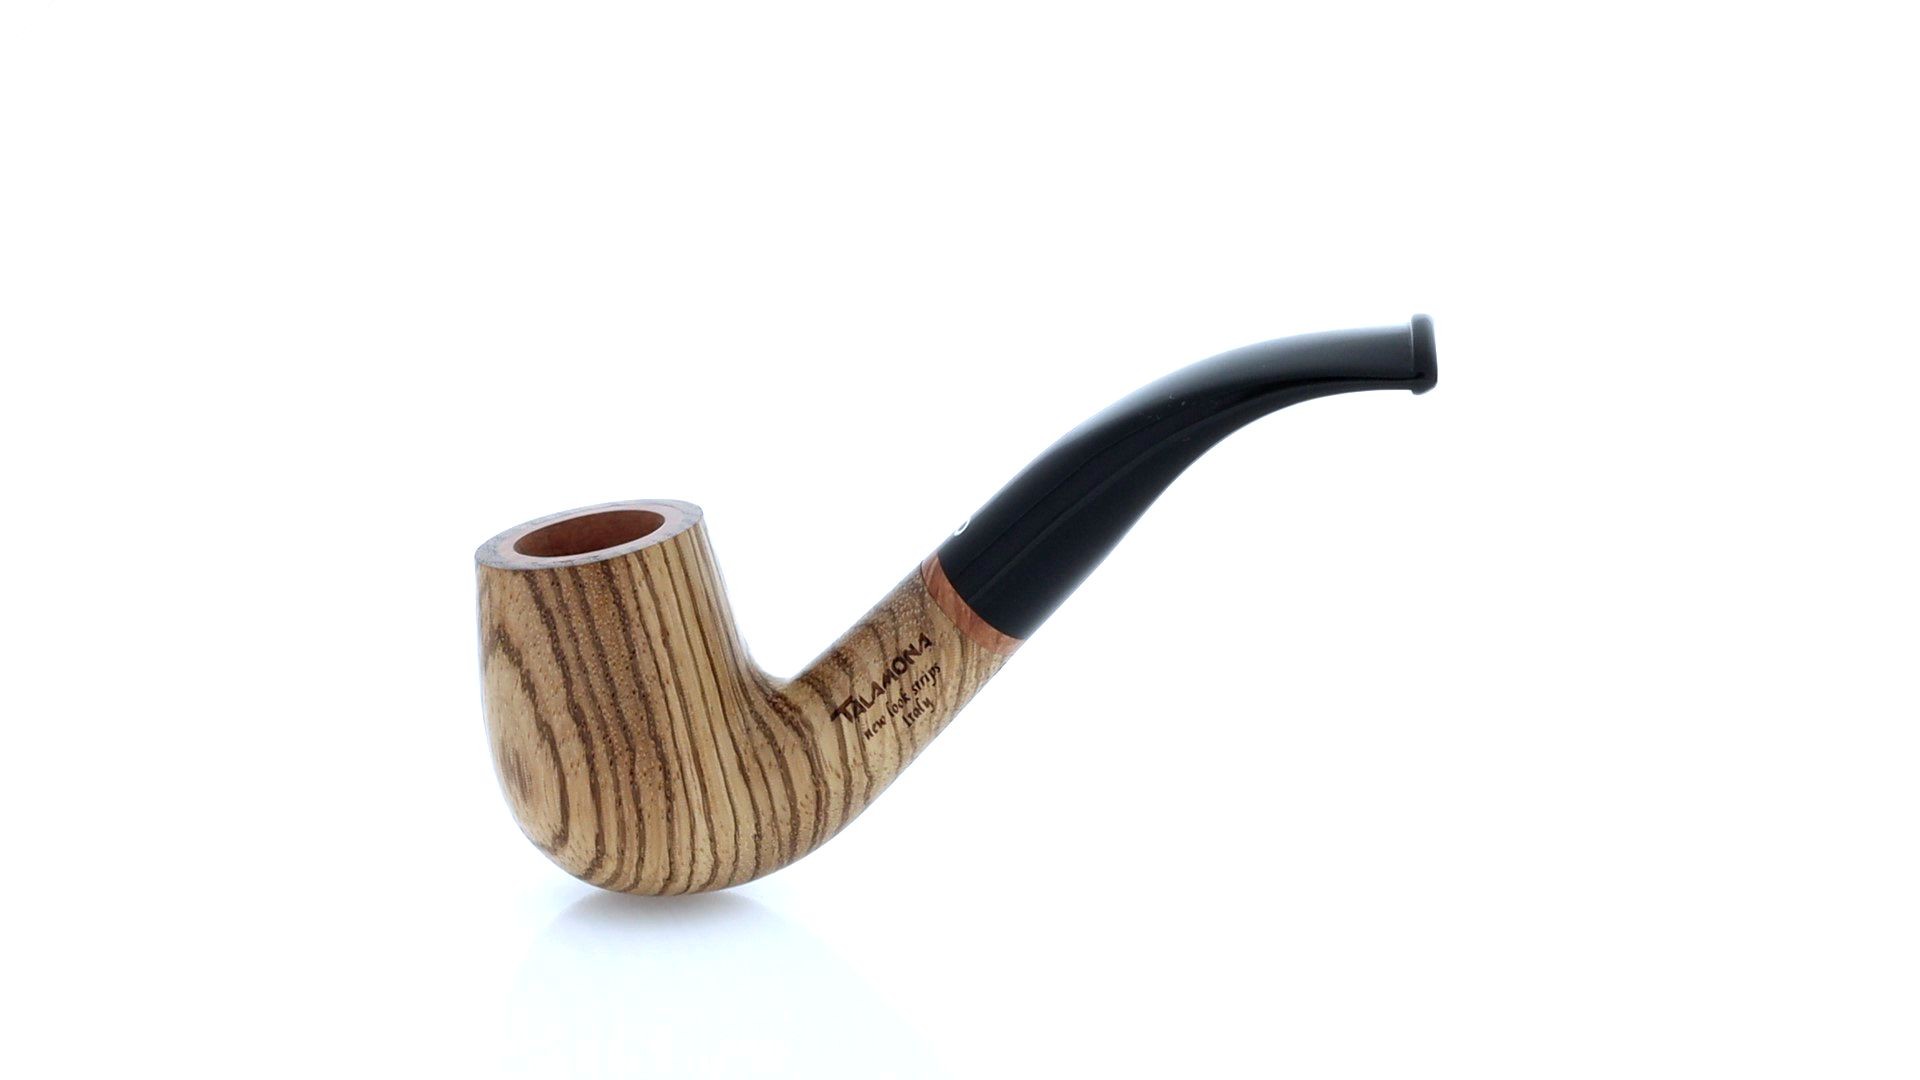 New look strips series pipe, zebrano finish, curved billiard shape